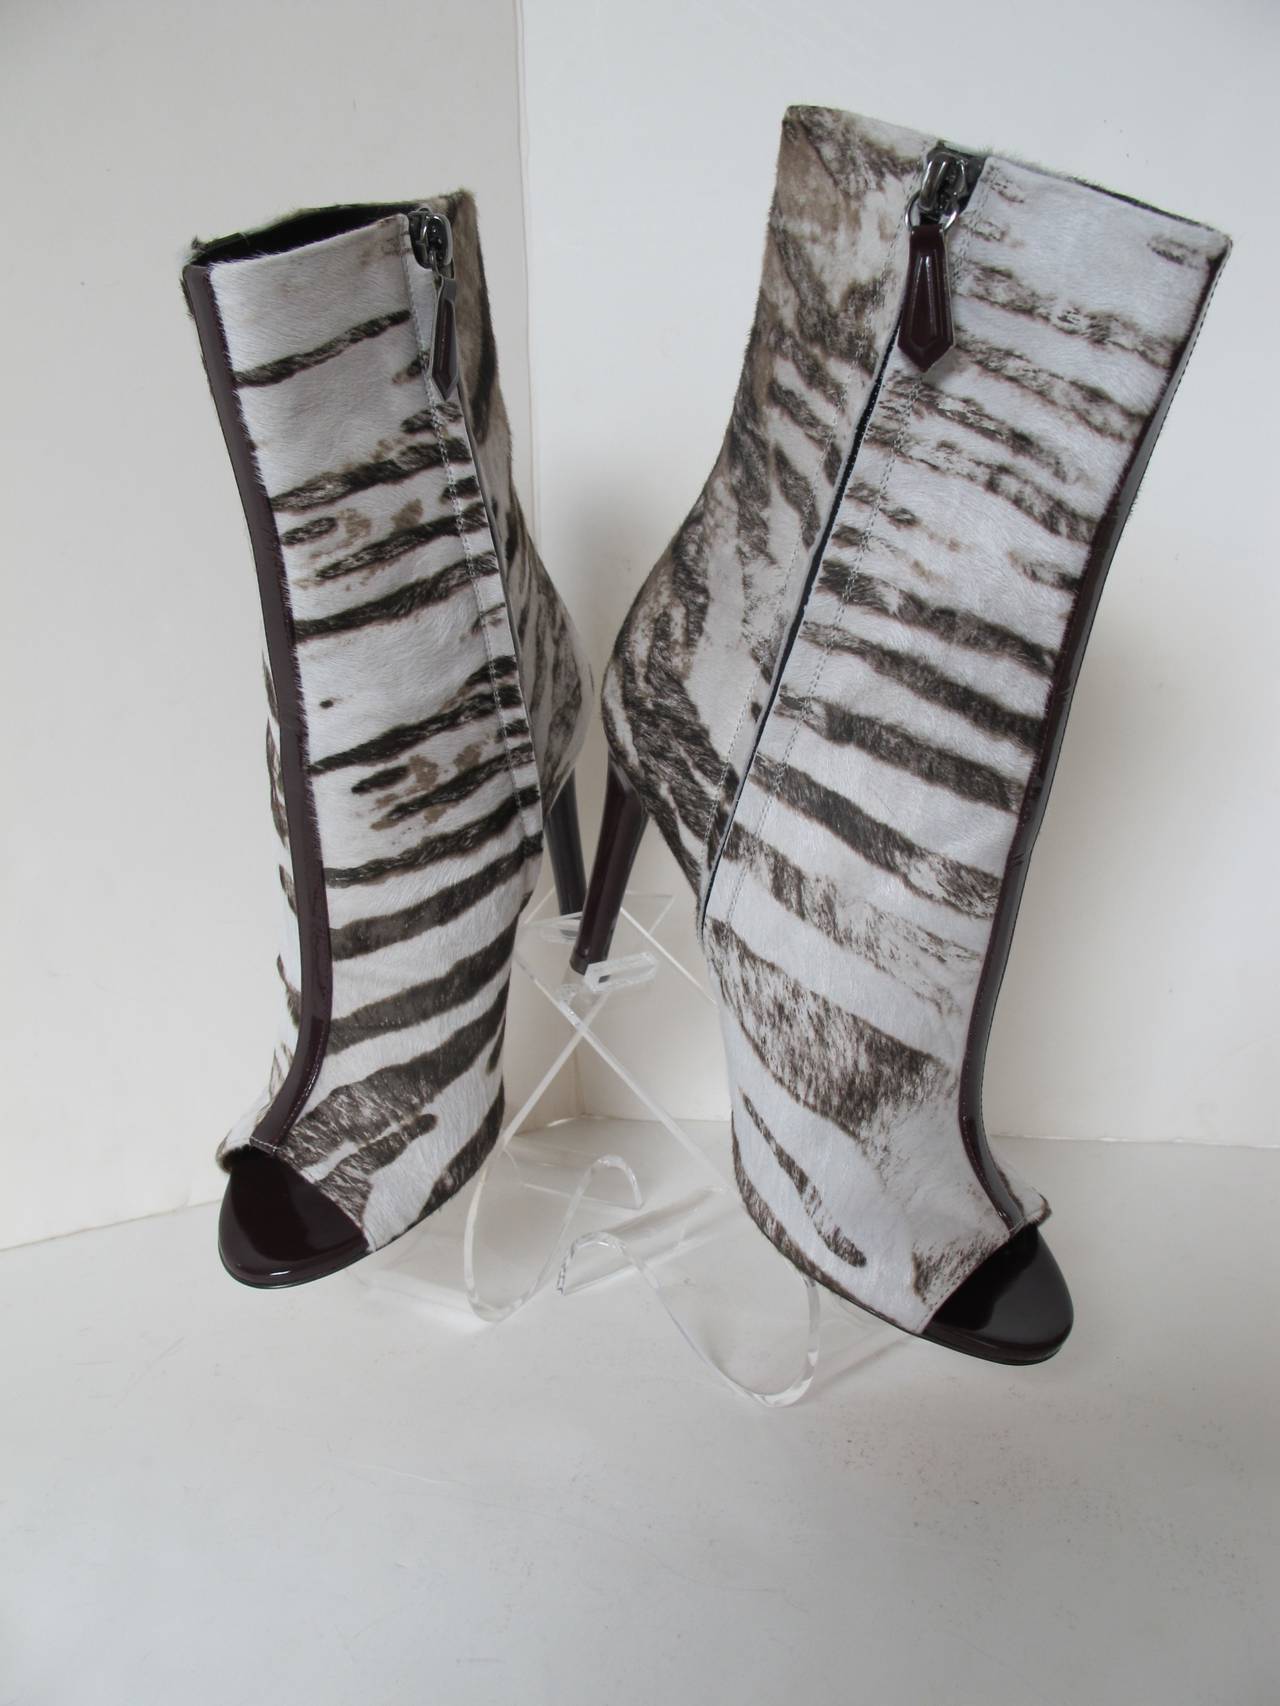 Dramatic Reed Krakoff Peeptoe Zebra Bootie with deep Cordovan Patent Leather Stripe Cascading down front and Cordovan heel. The Zebra design is so chic. Heel measures 3.25 inches. Heel is entirely covered around it with the Cordovan patent leather.